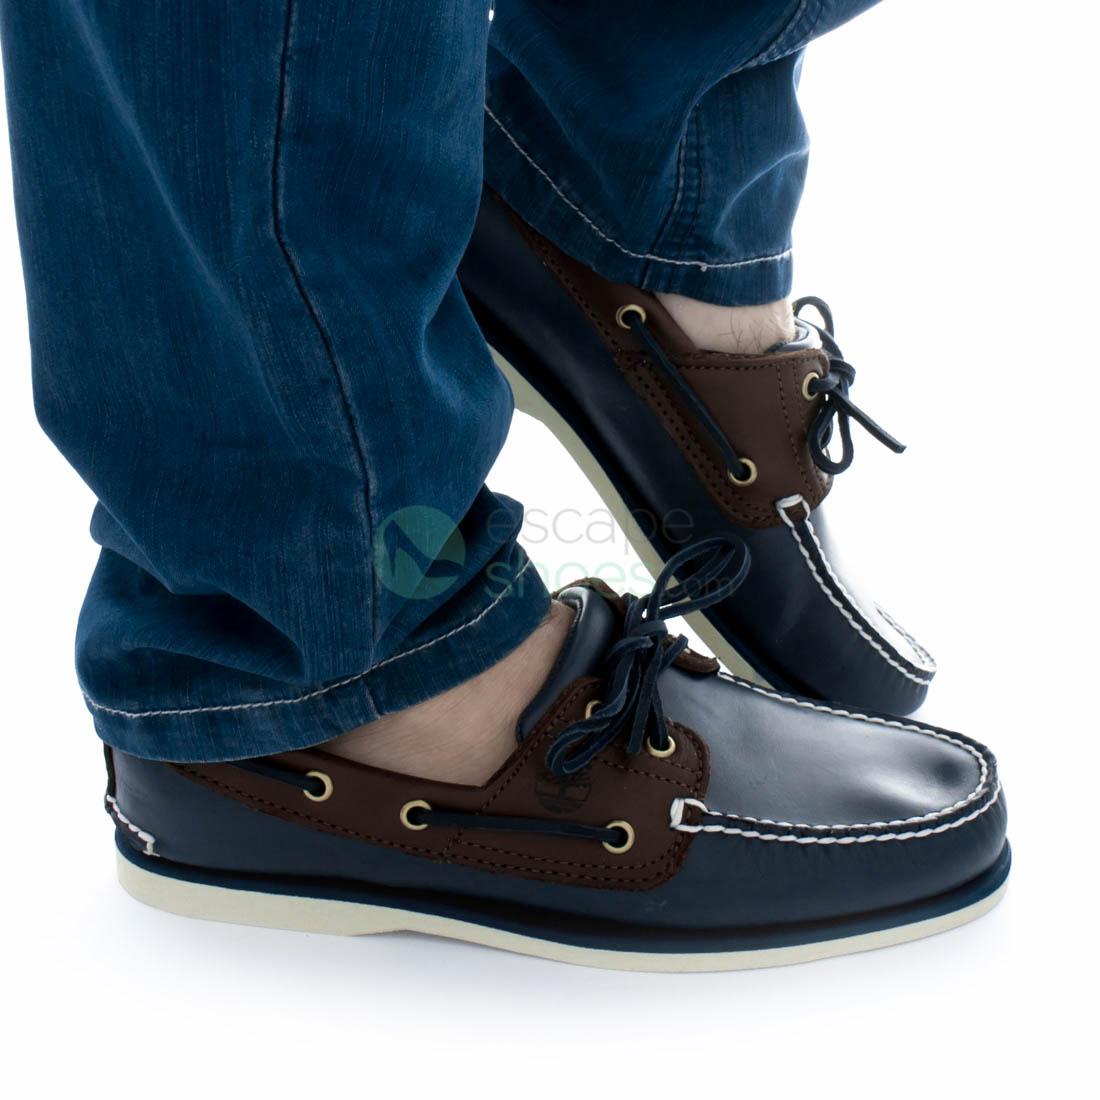 blue timberland boat shoes